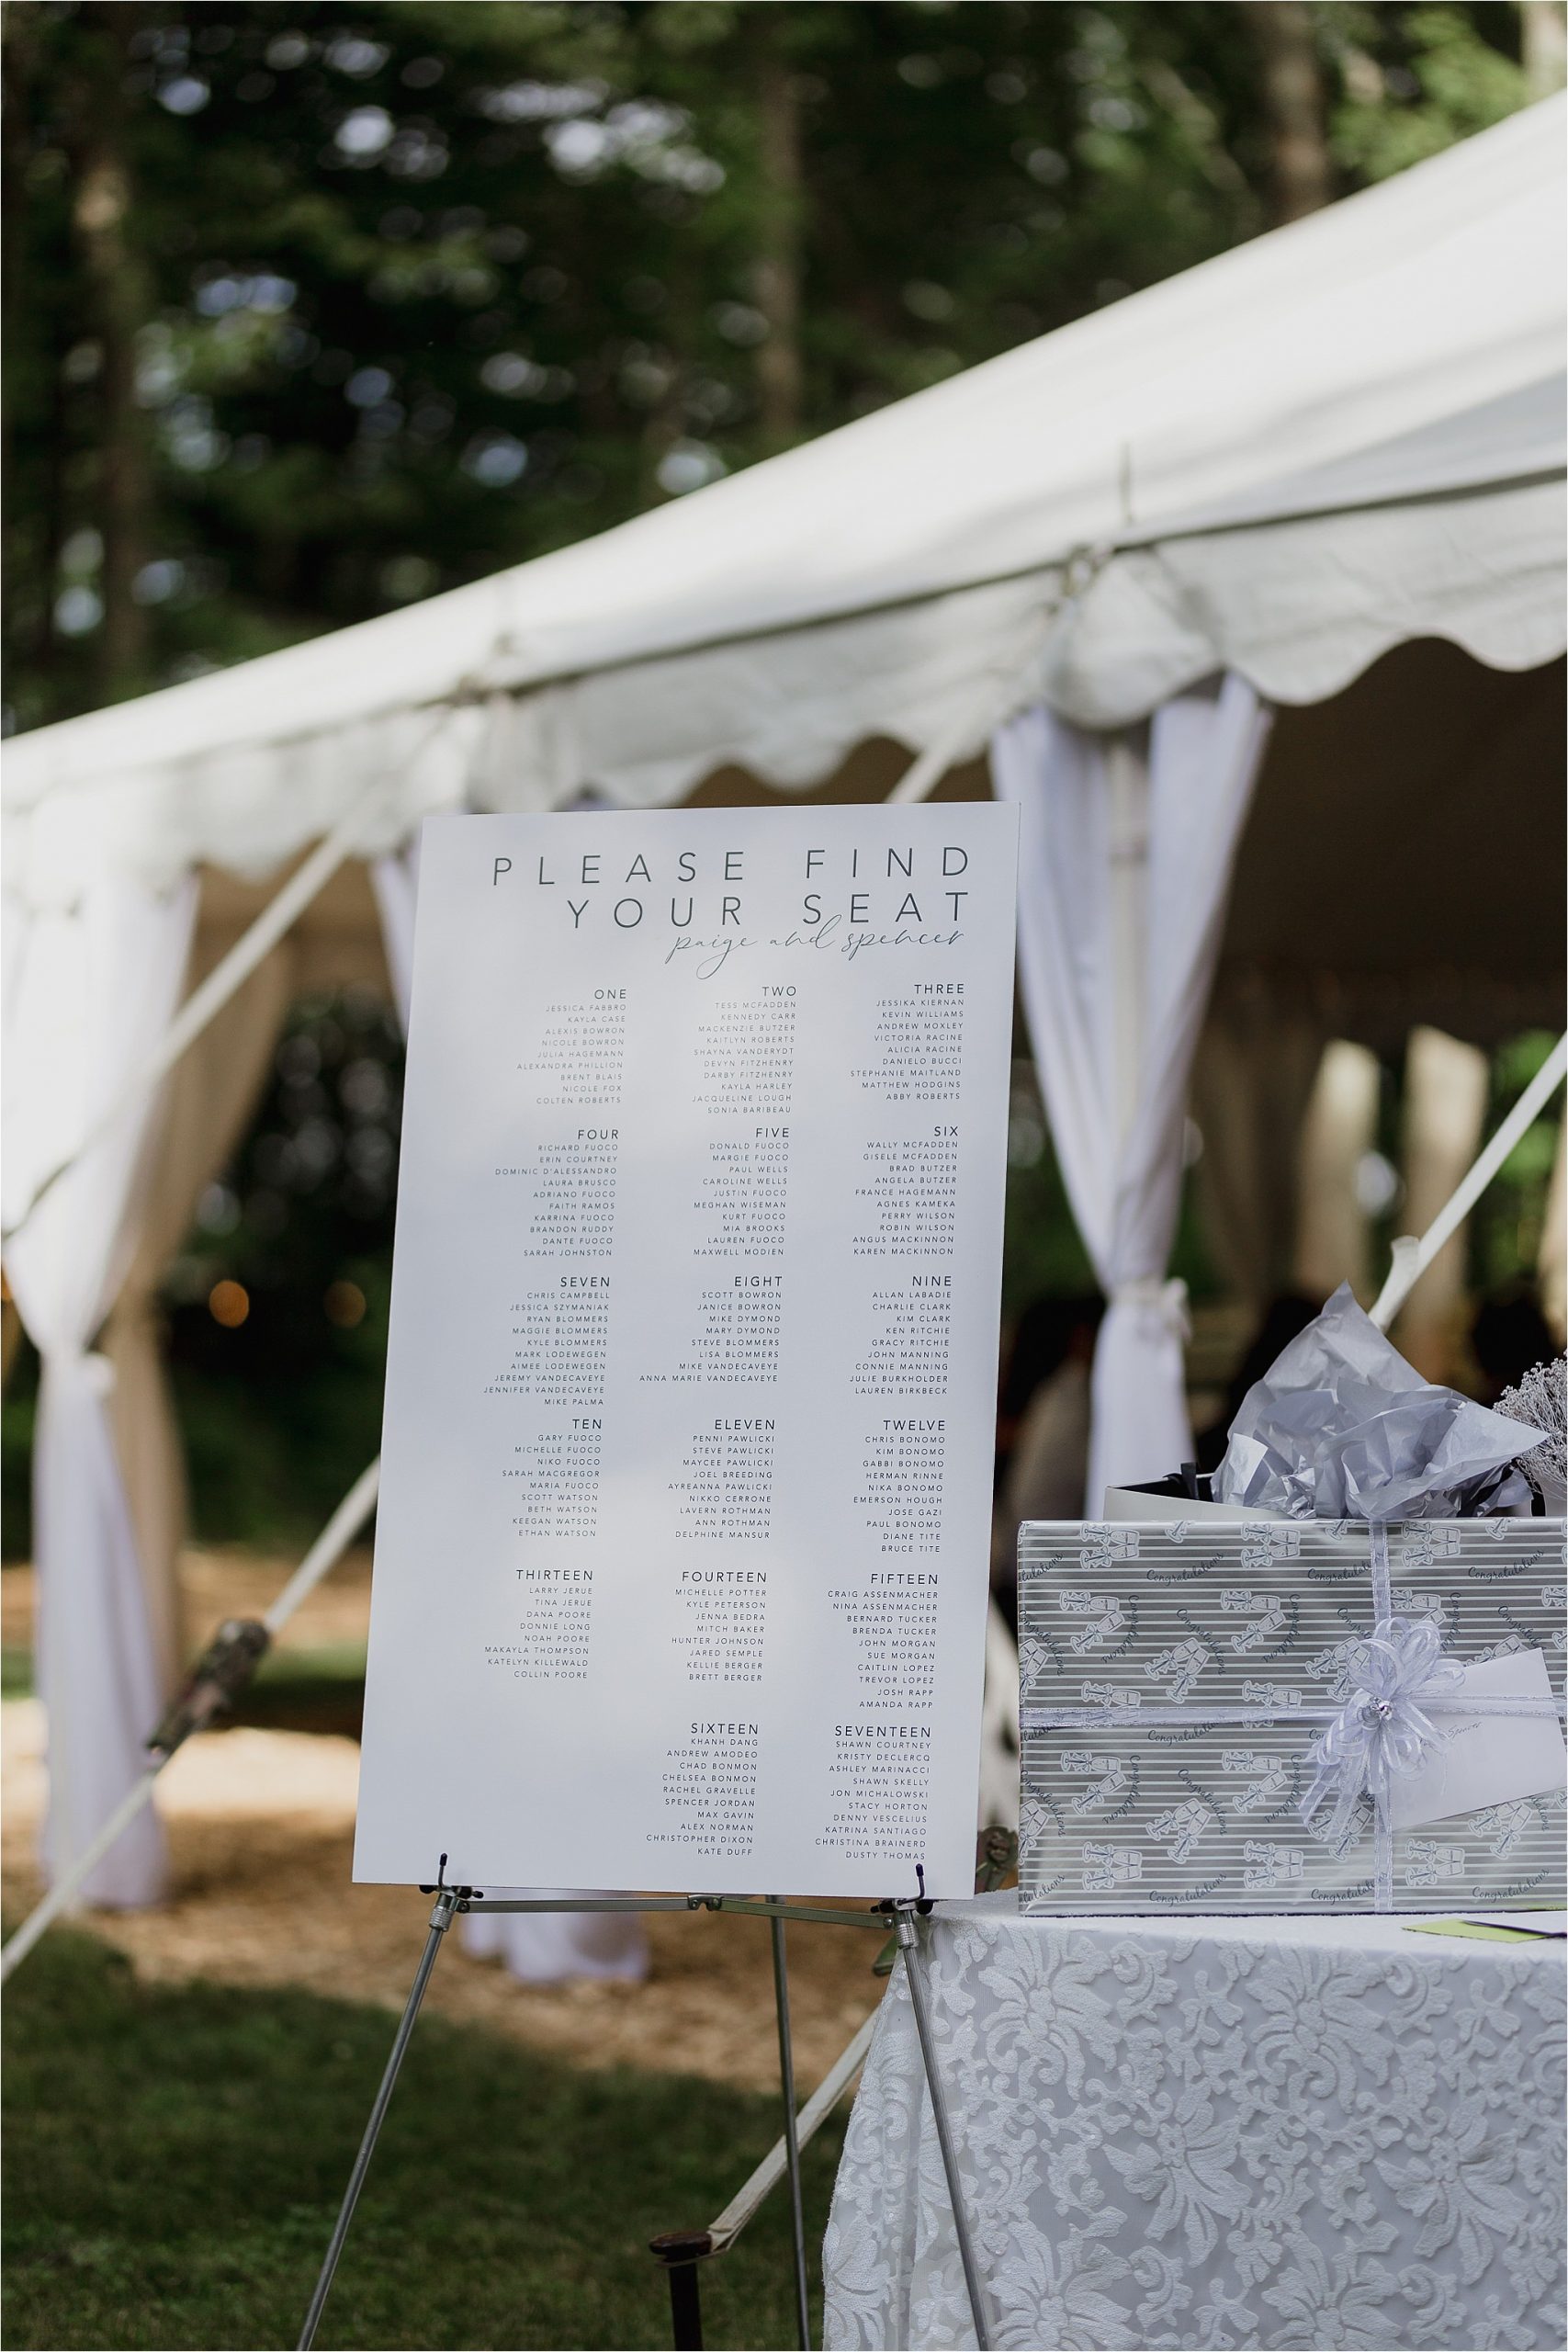 Sonia V Photography, The Clearing reception wedding venue, seating chart, table numbers